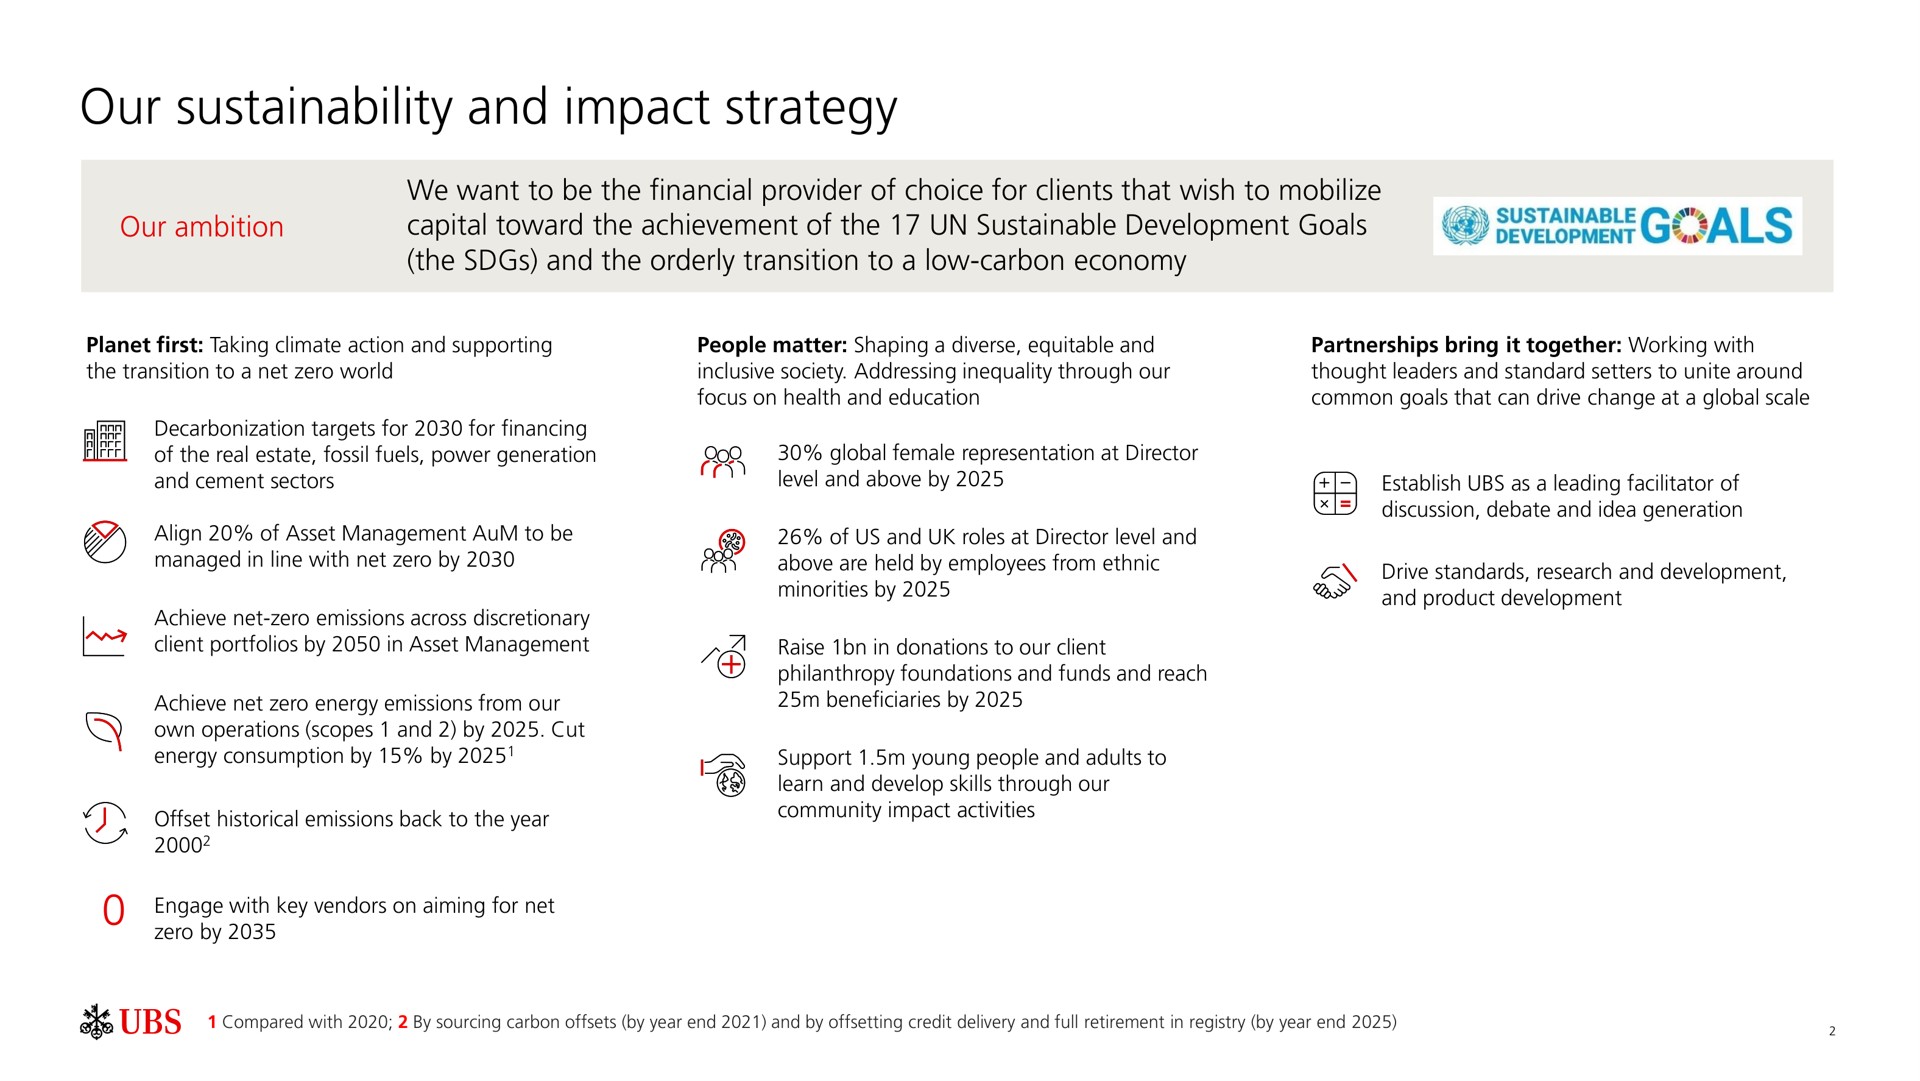 our and impact strategy ambition capital toward the achievement of the sustainable development goals | UBS